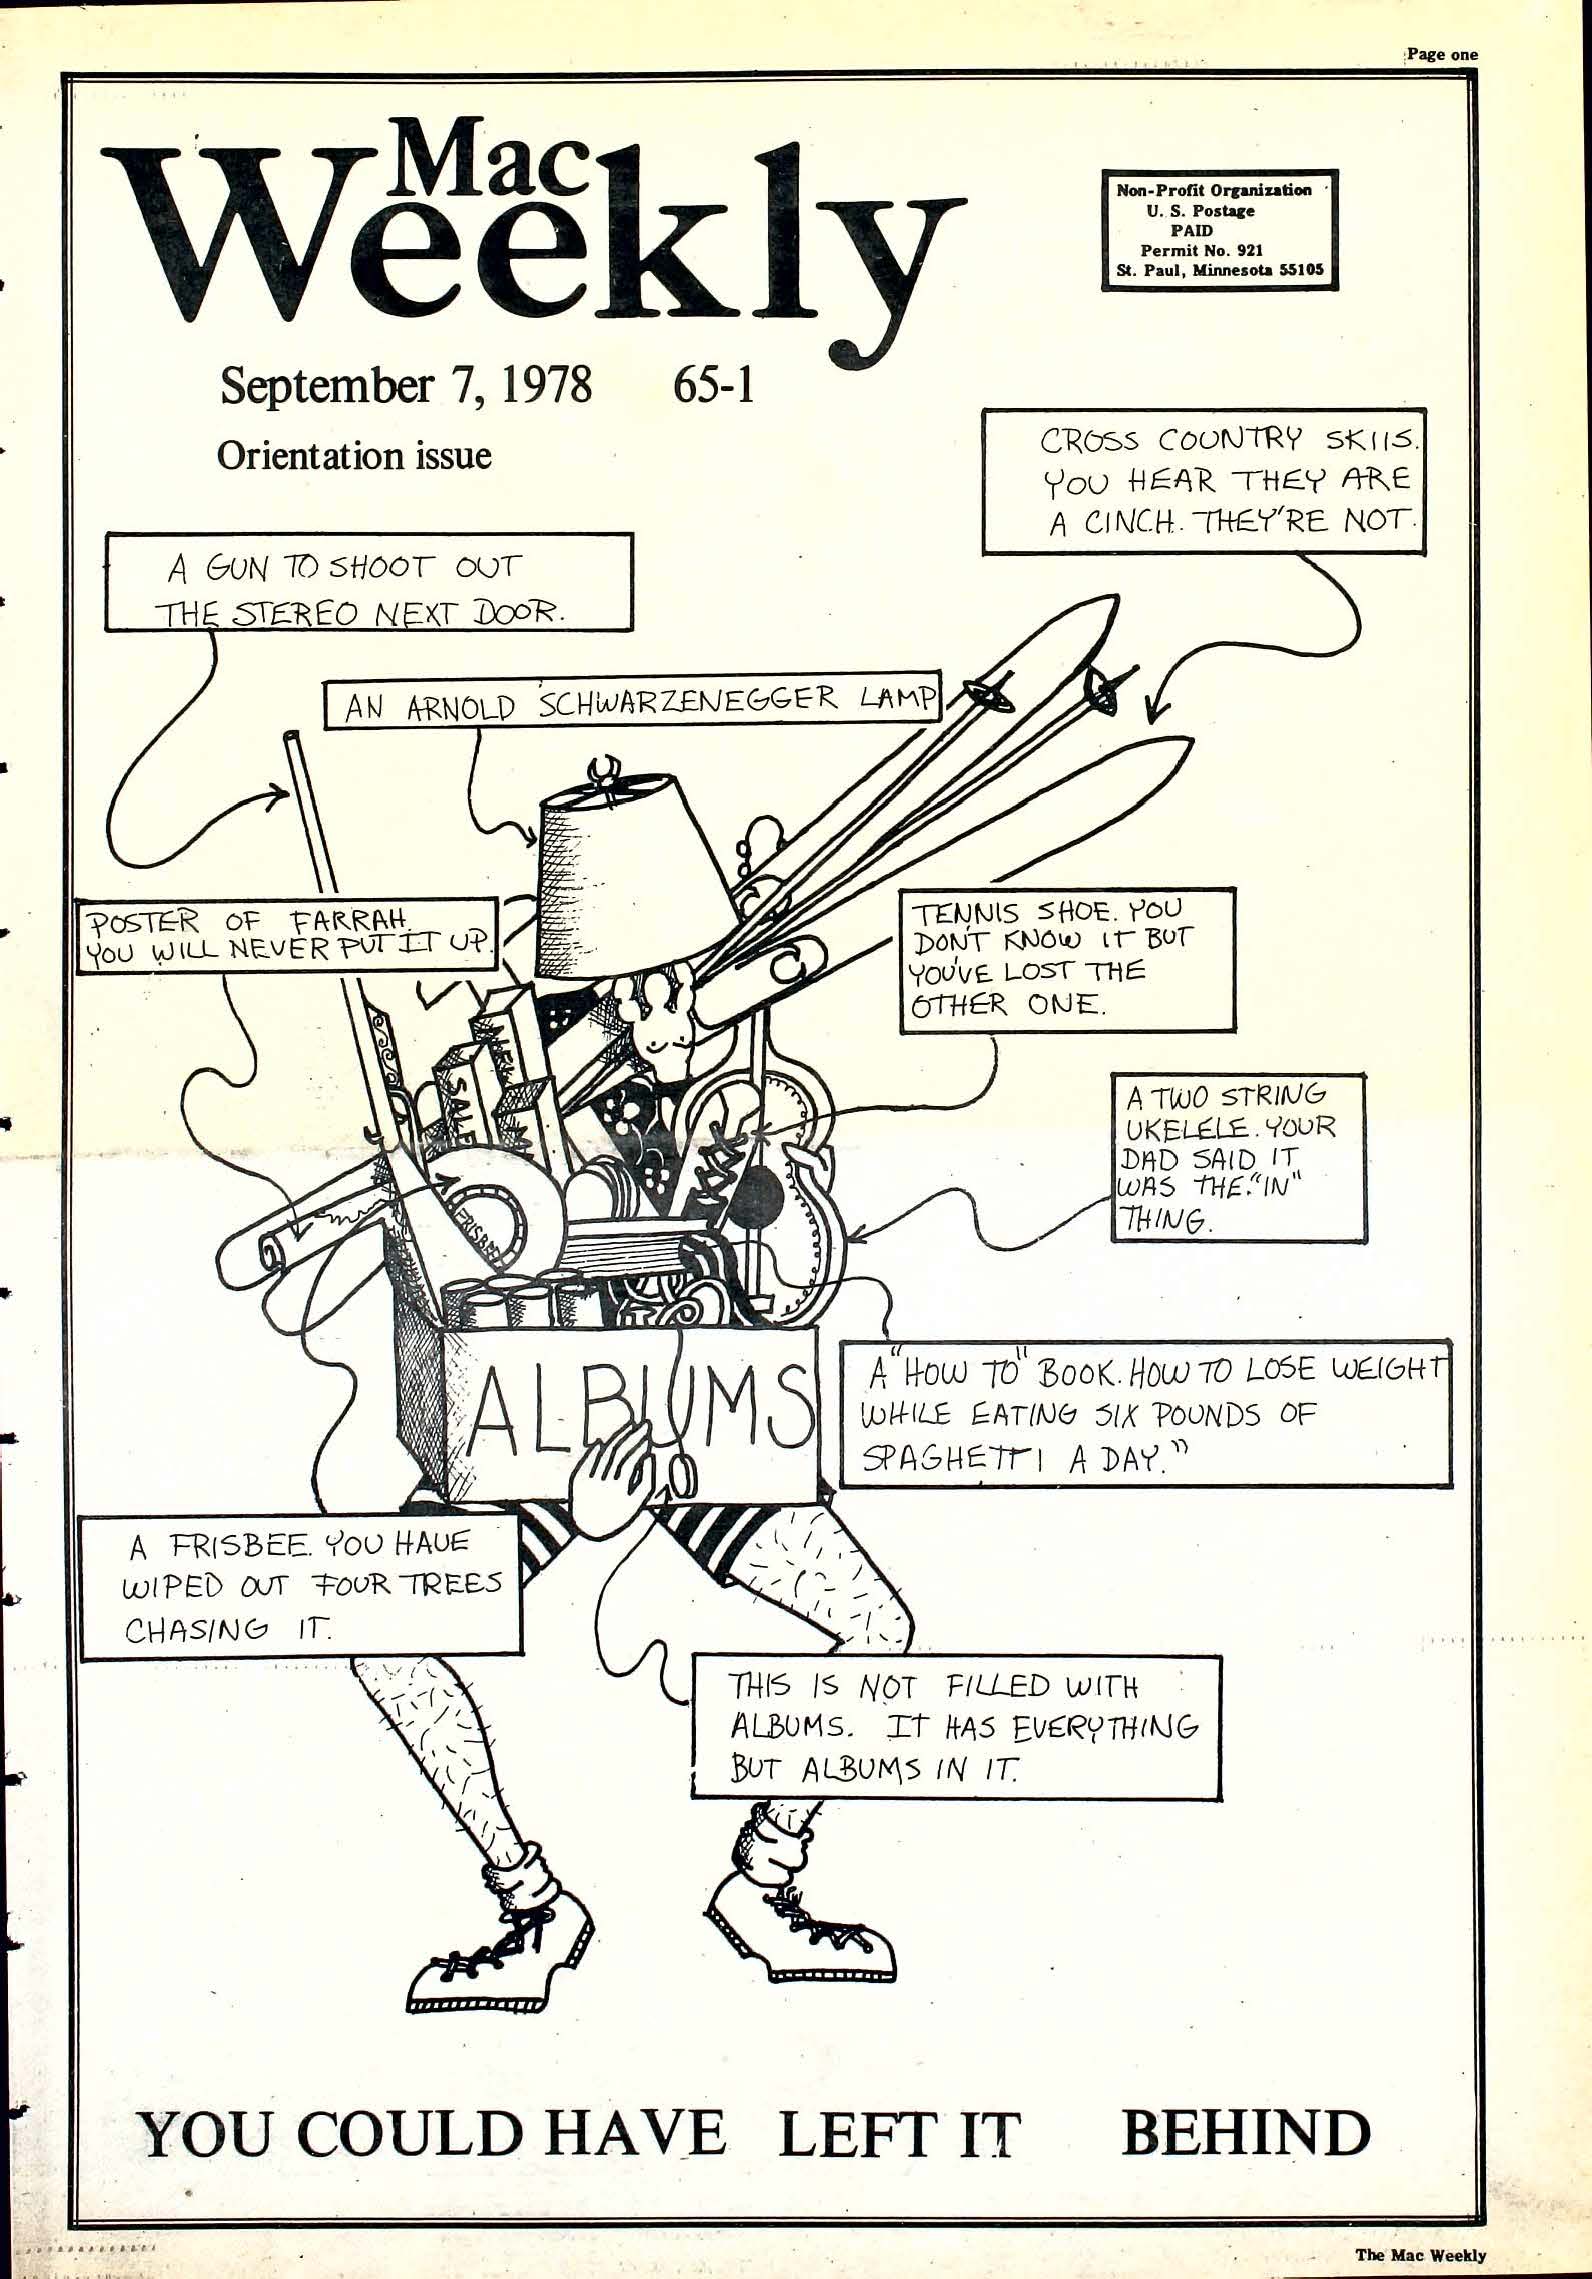 The Mac Weekly, September 7, 1978. Orientation Issue.